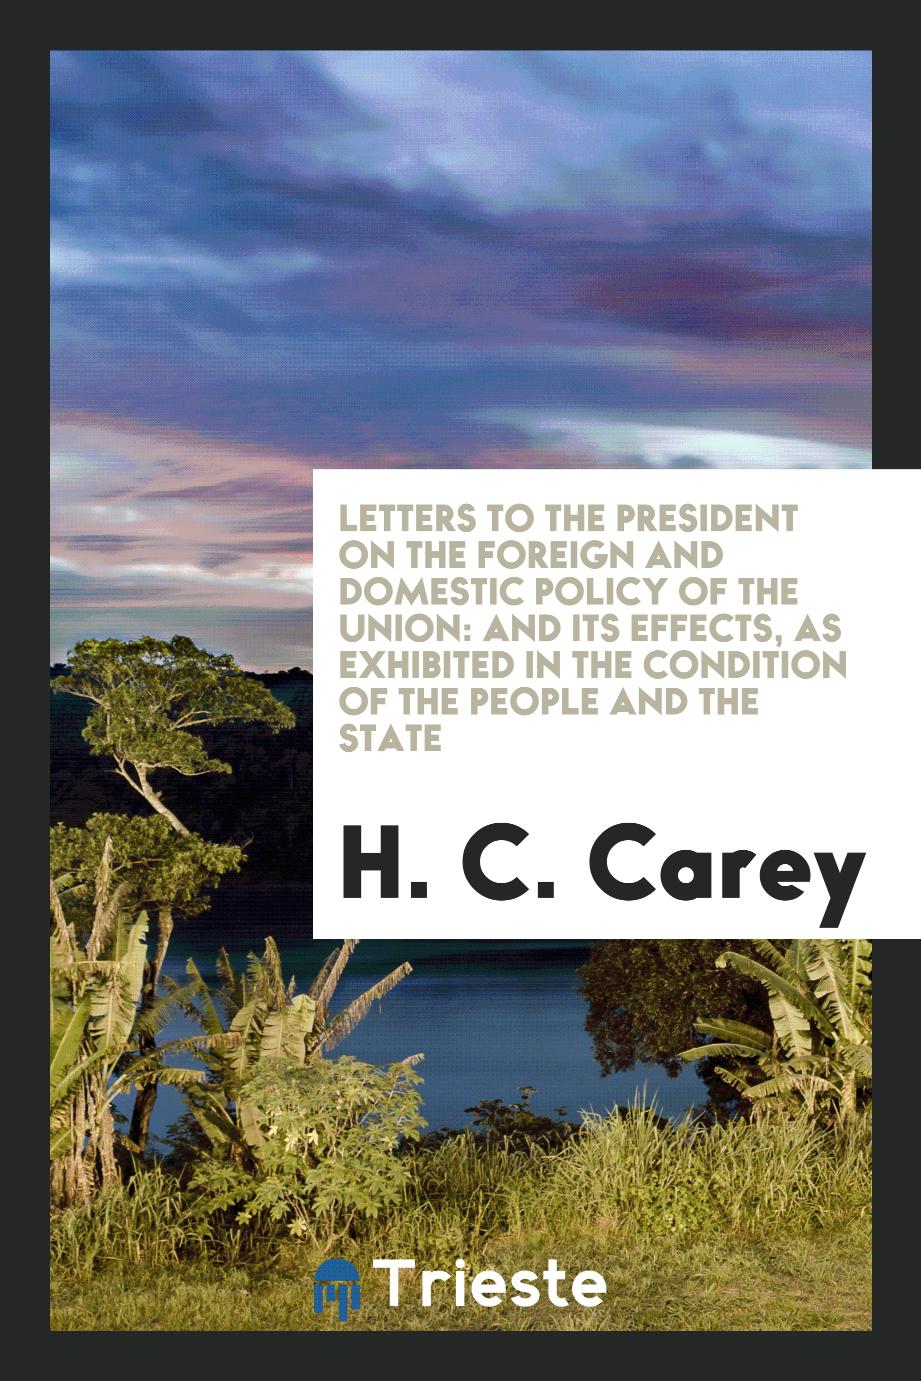 Letters to the President on the Foreign and Domestic Policy of the Union: And Its Effects, as Exhibited in the Condition of the People and the State